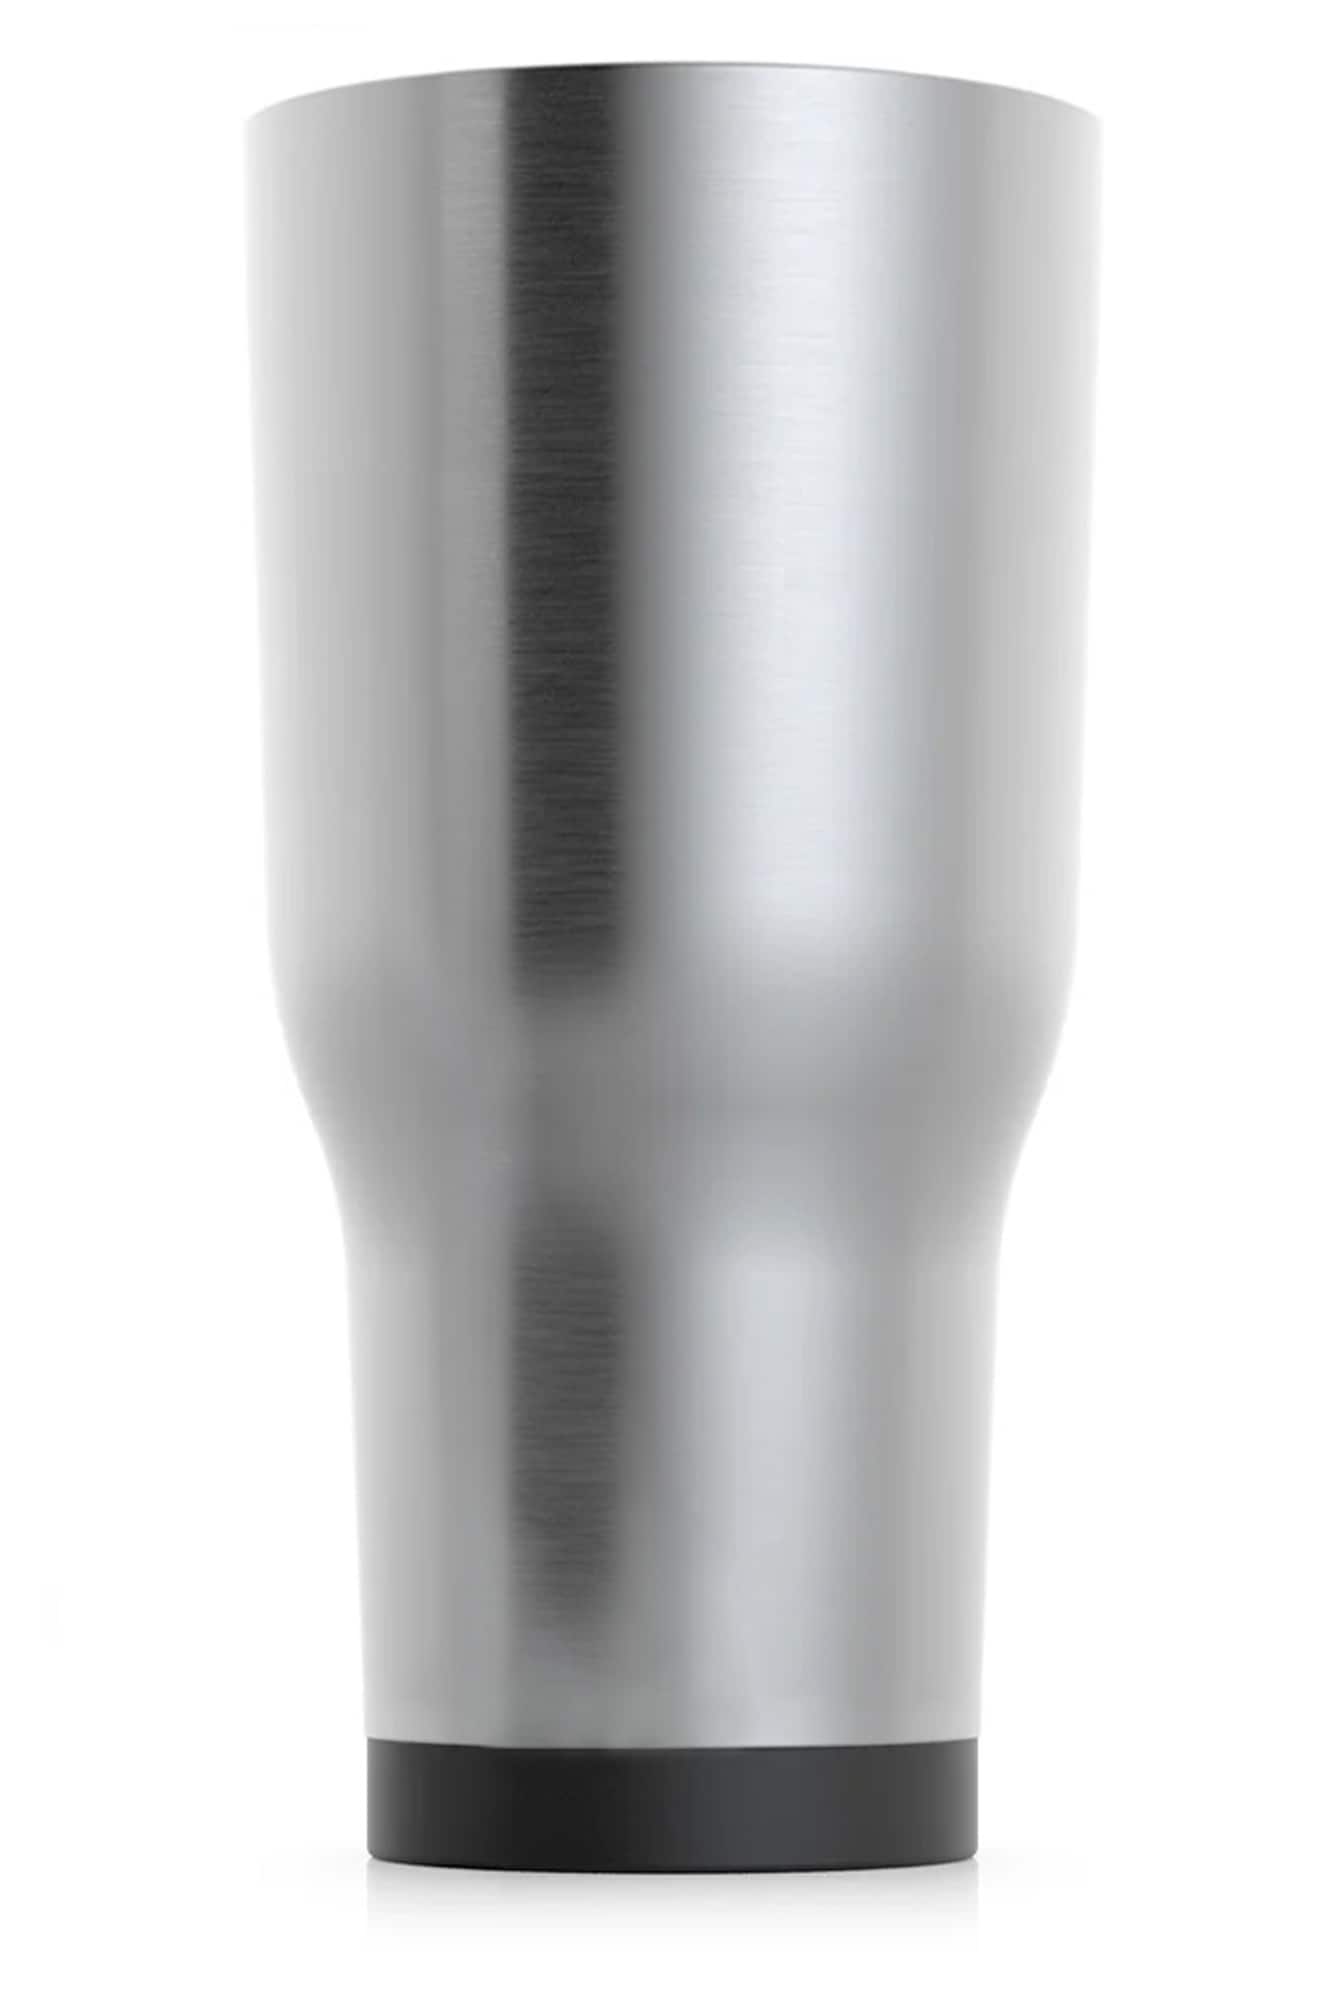 RTIC Outdoors 40-fl oz Stainless Steel Insulated Tumbler in the